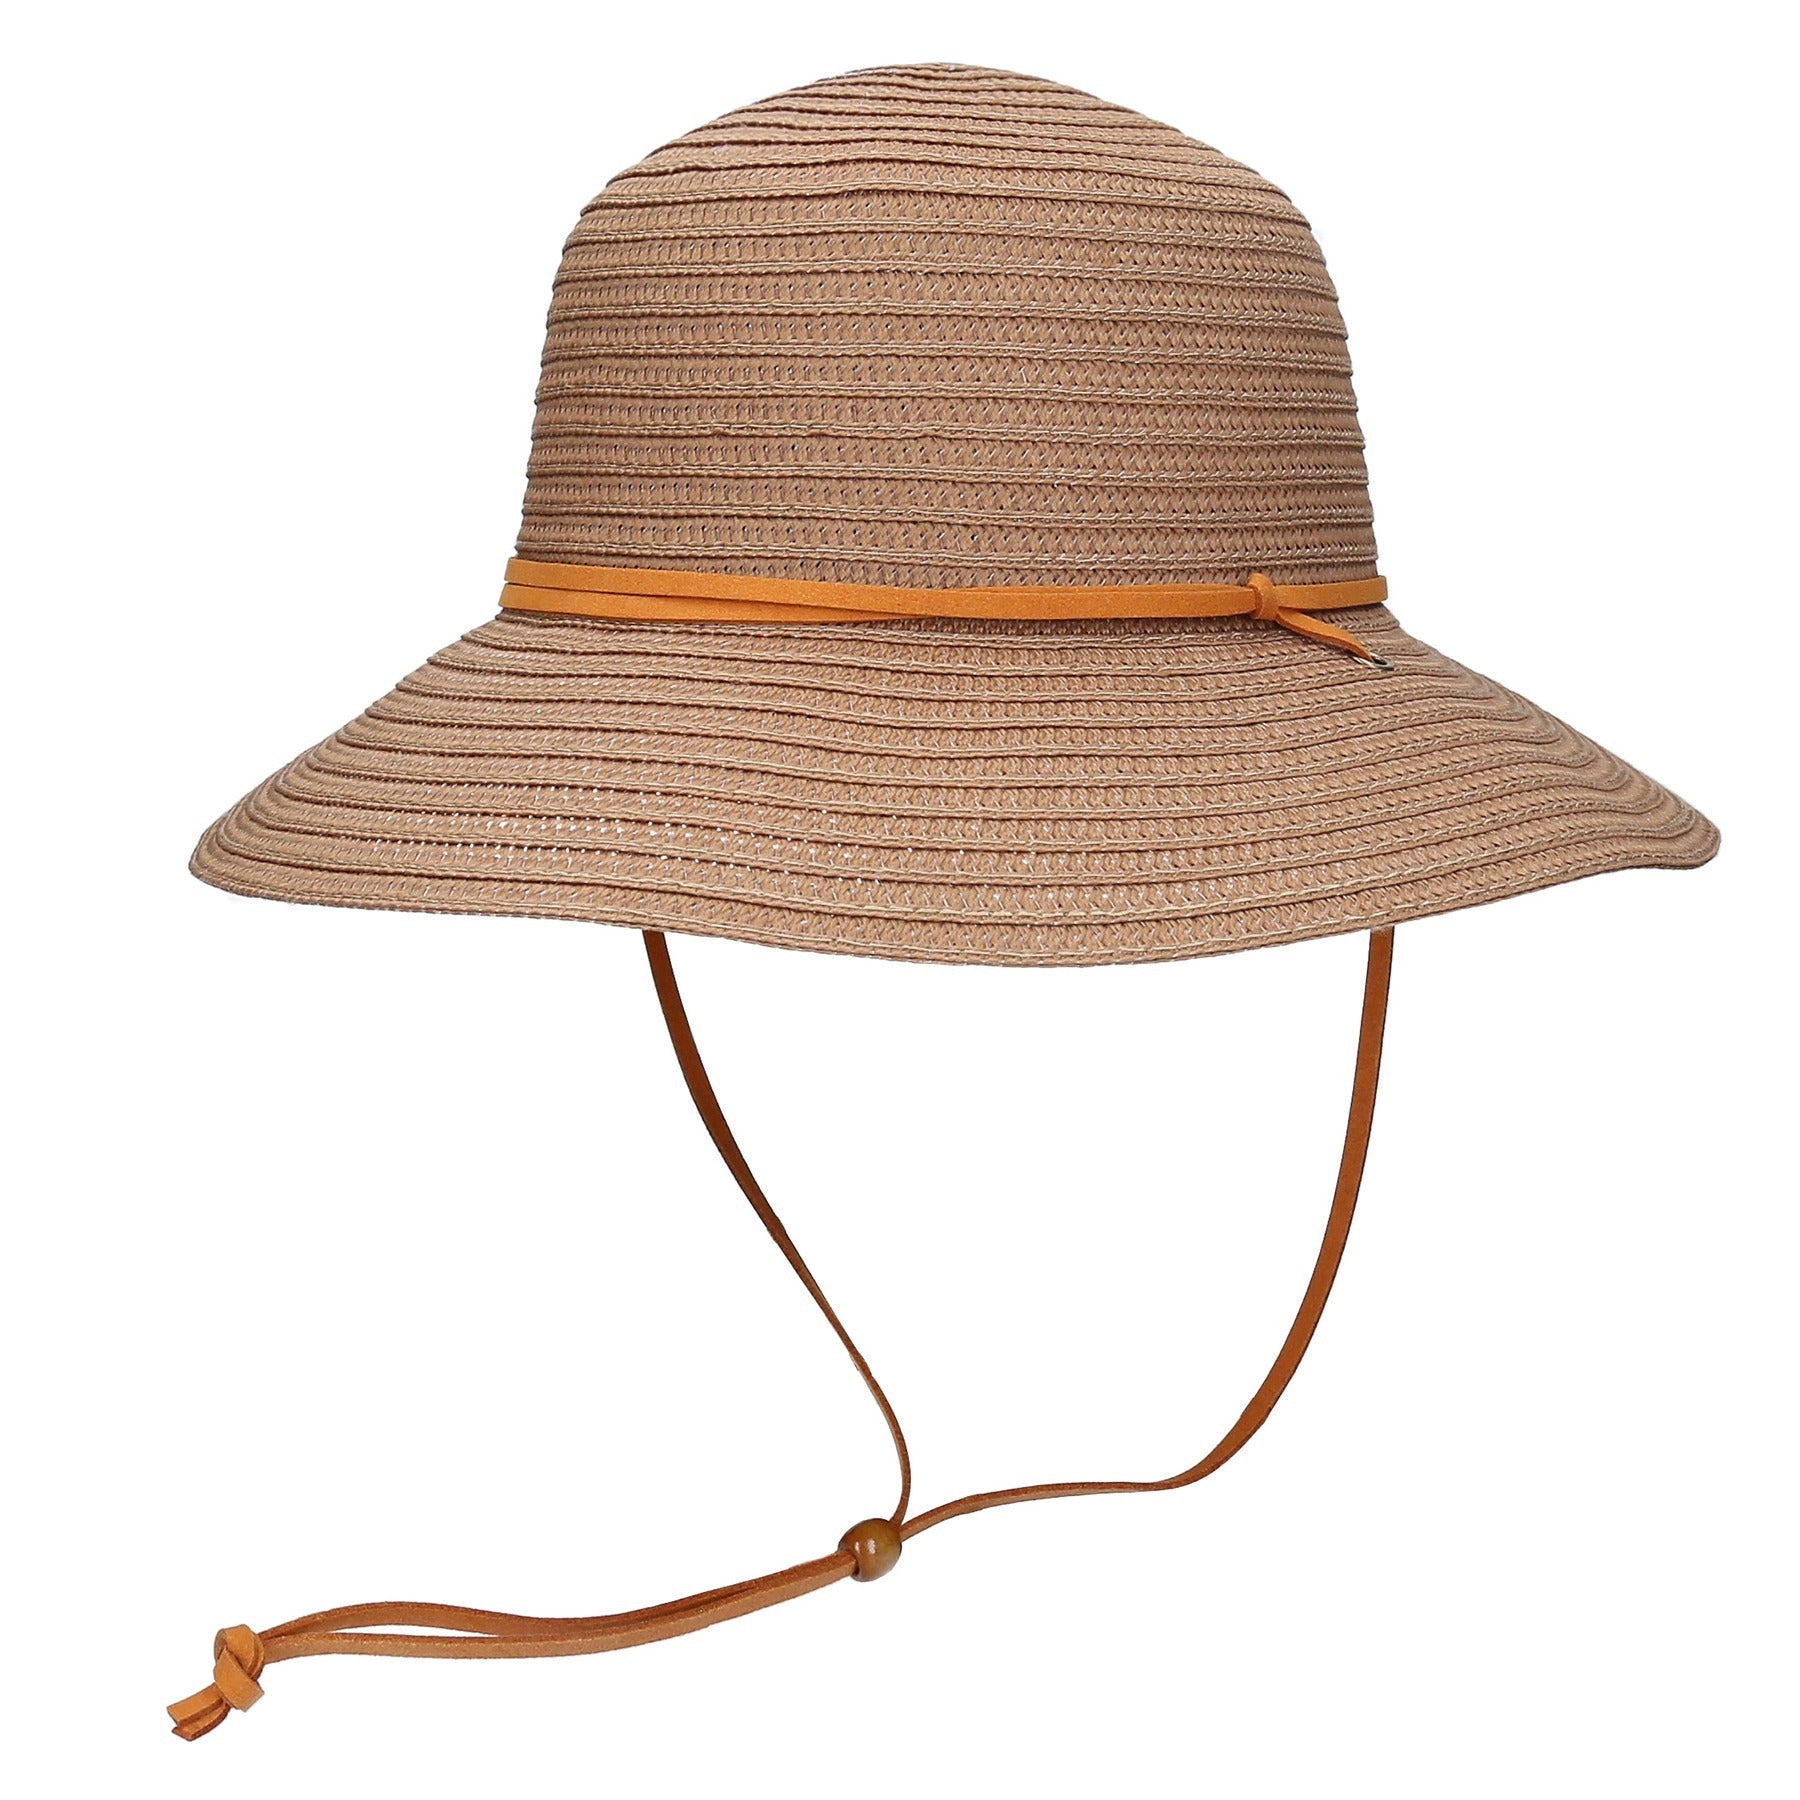 Wanderlust Breeze Crushable Straw Hat CTR Style:1357 Amber Brown / S/M